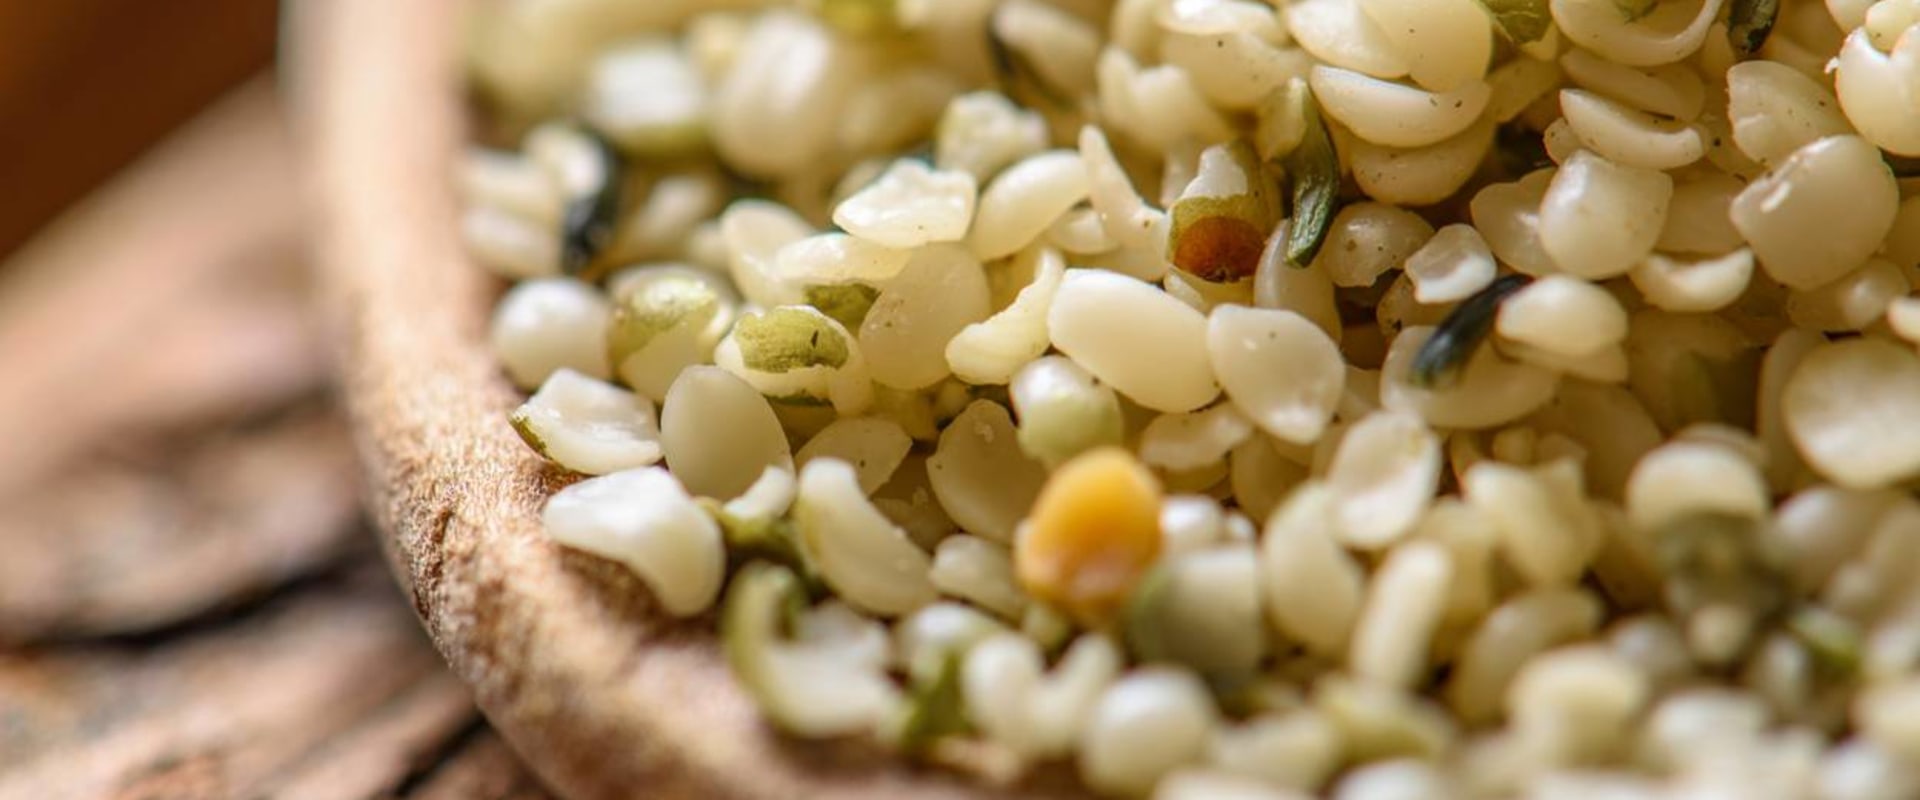 Does hemp seed show up in urine test?